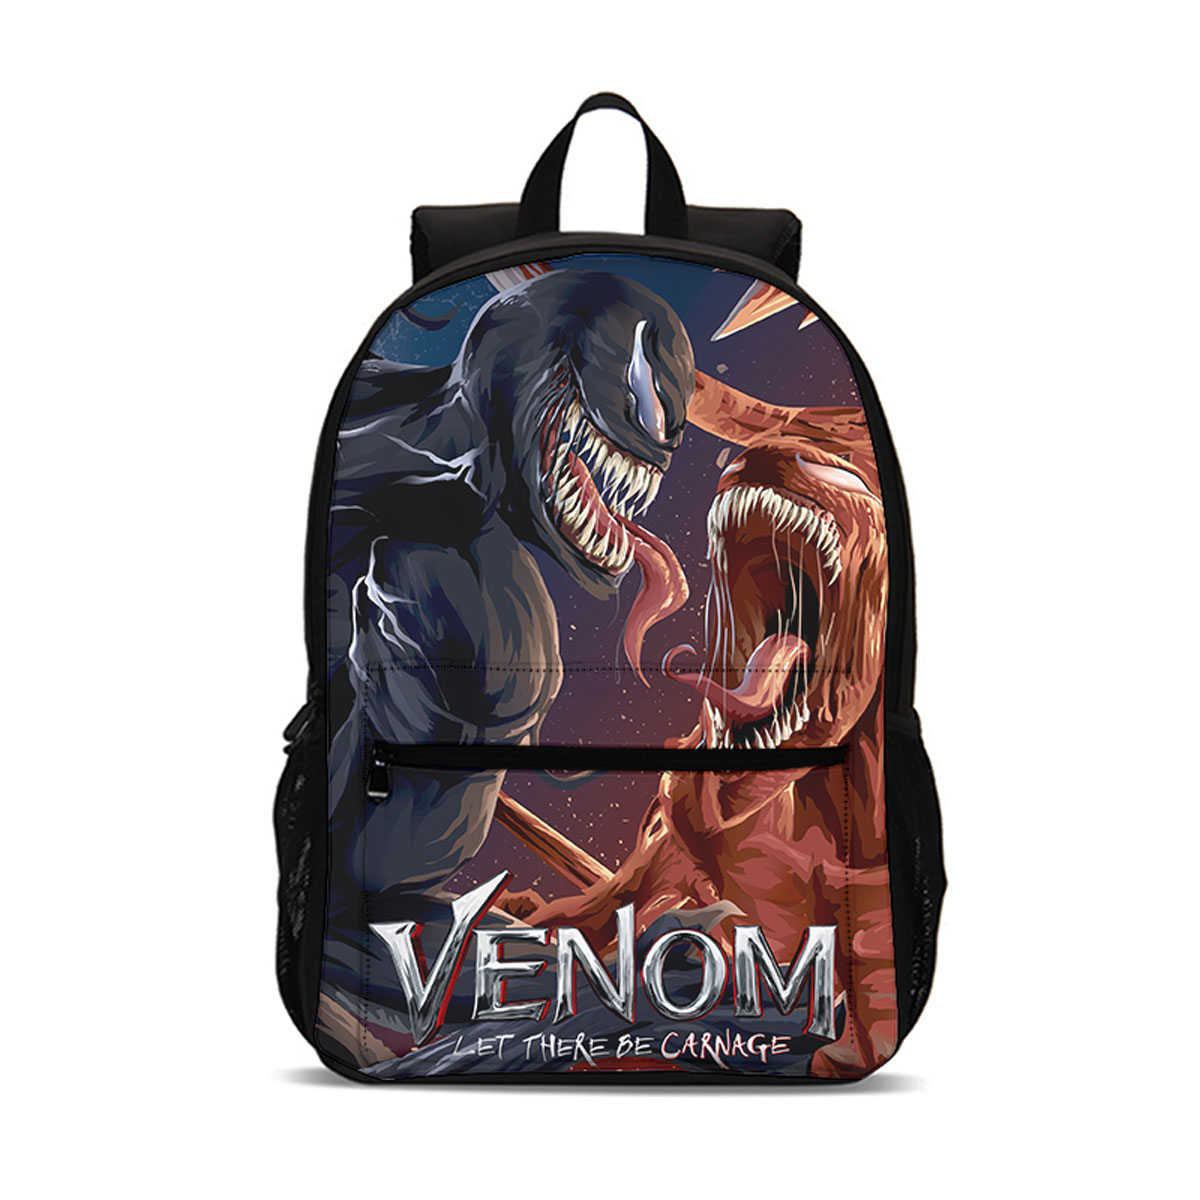 Venom 18 inches Backpack School Bag for Kids Large Capacity